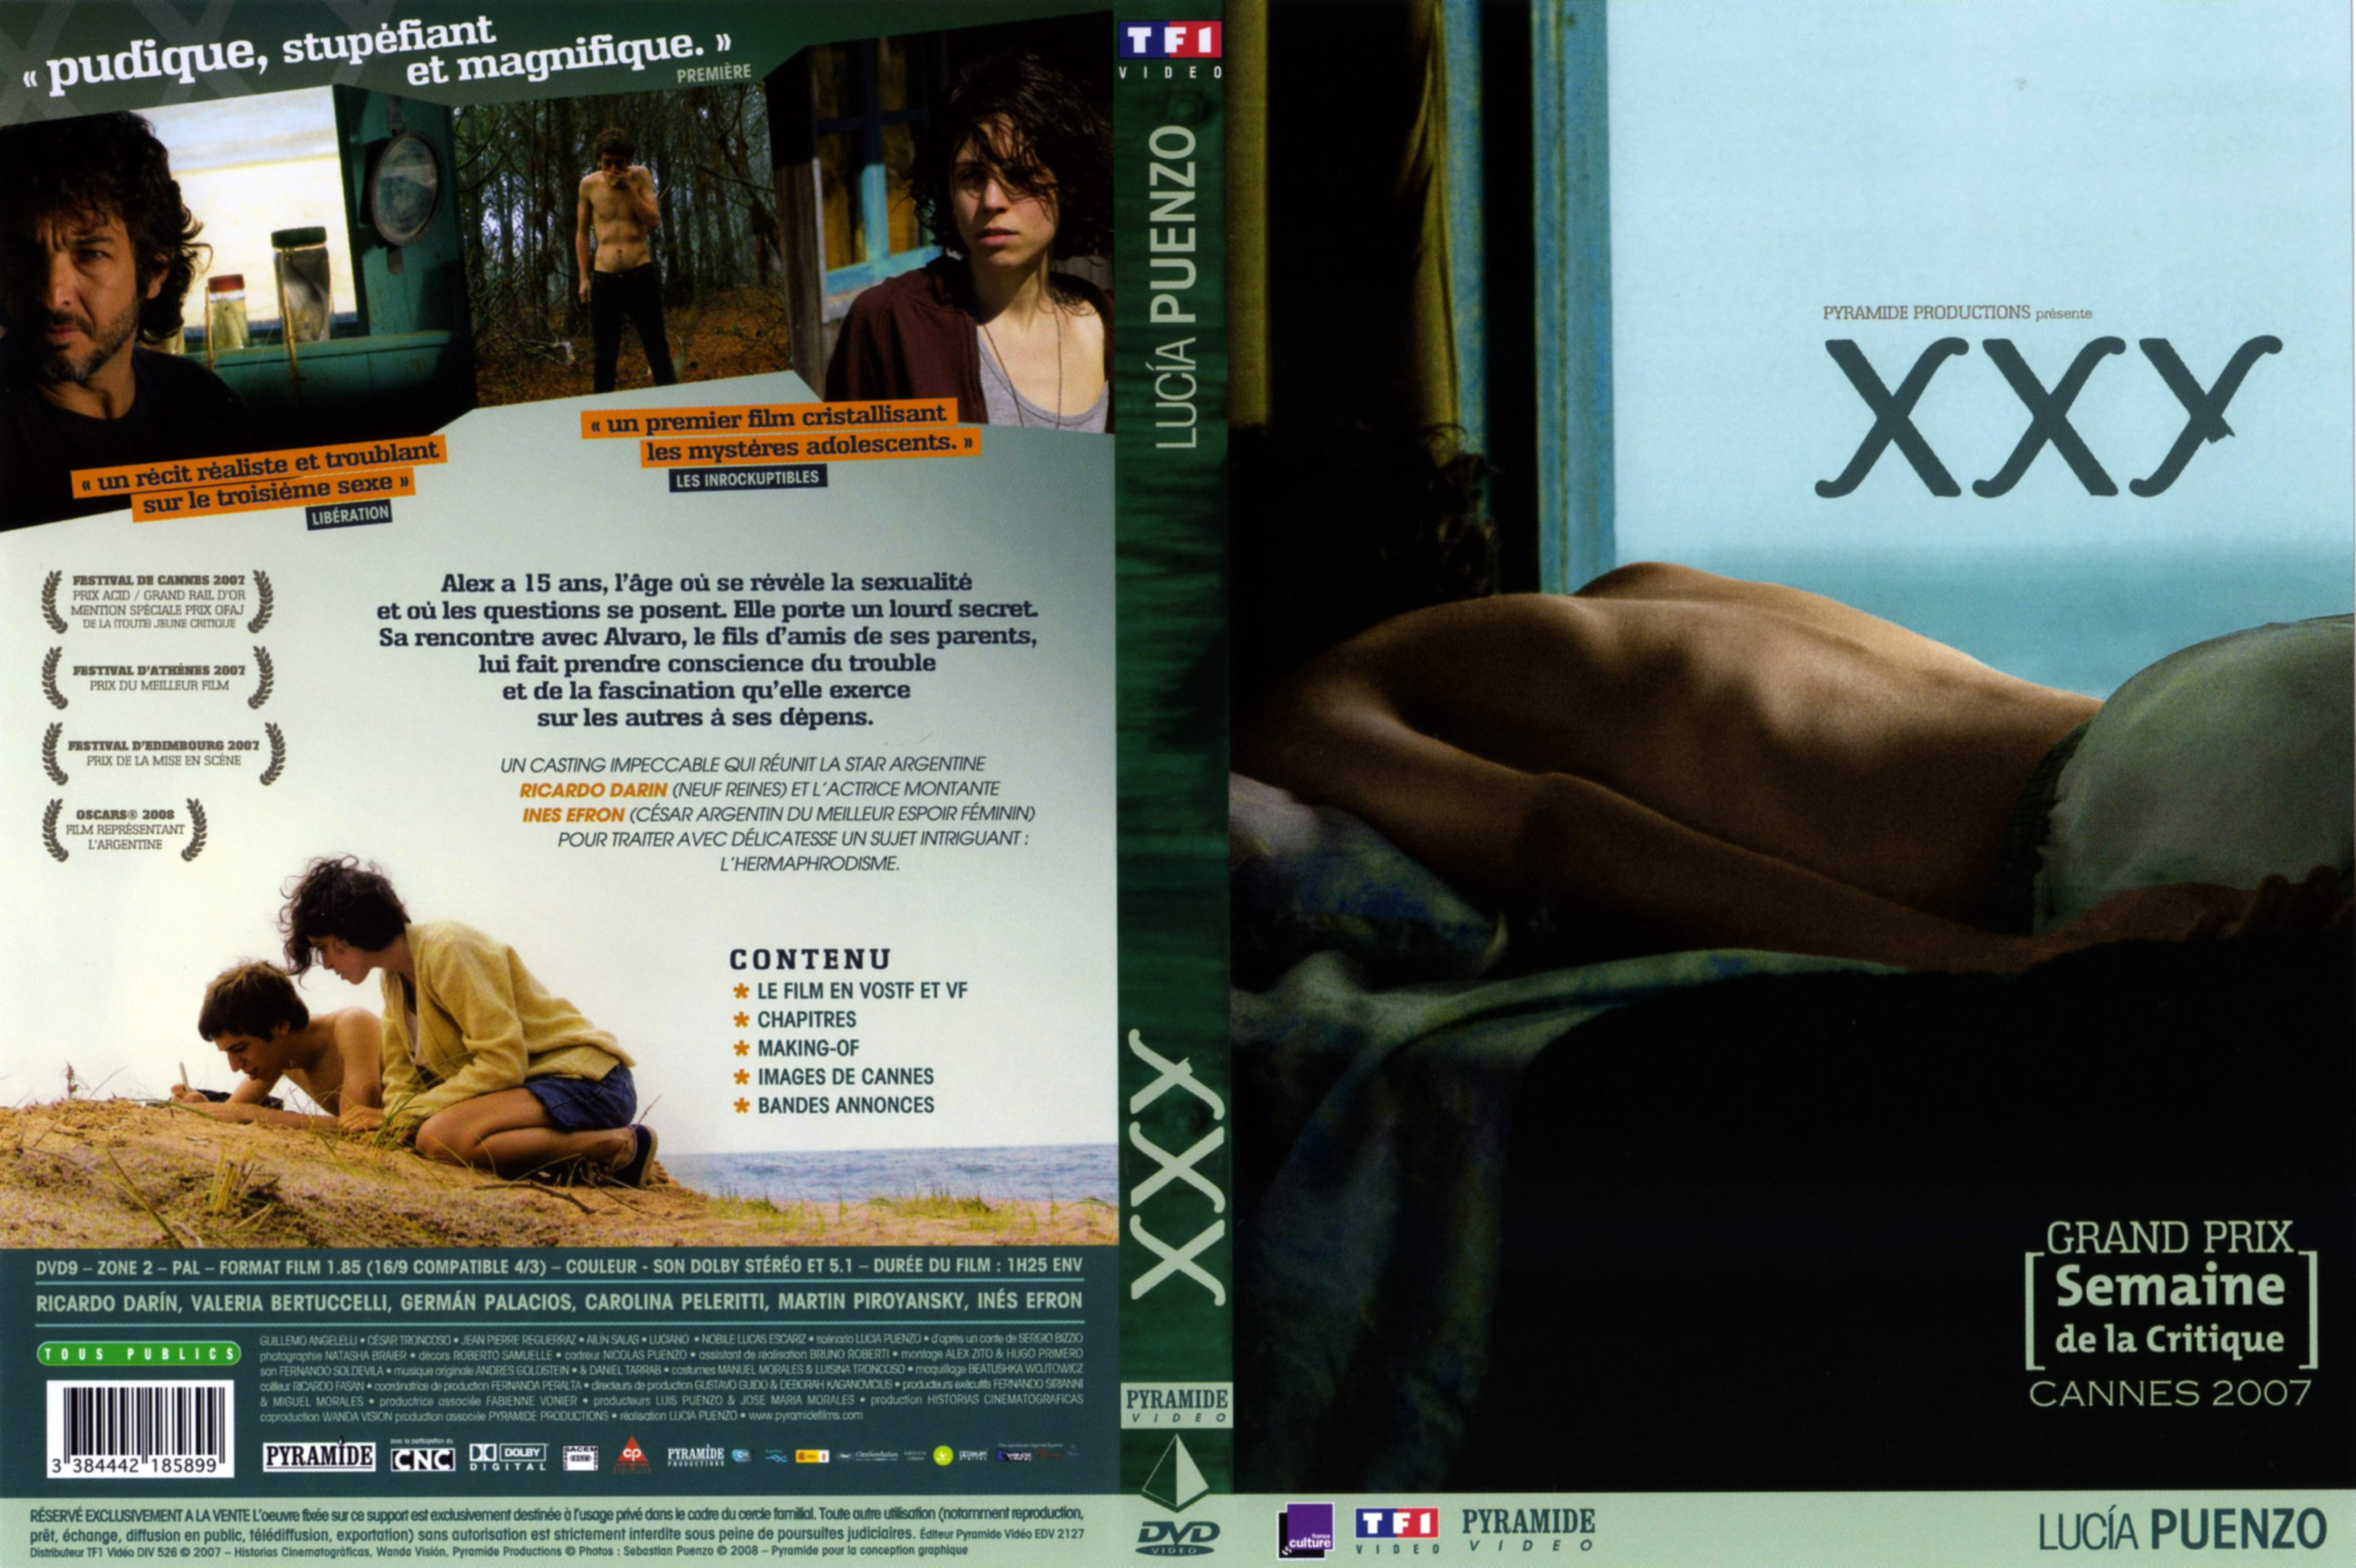 Jaquette DVD XXY